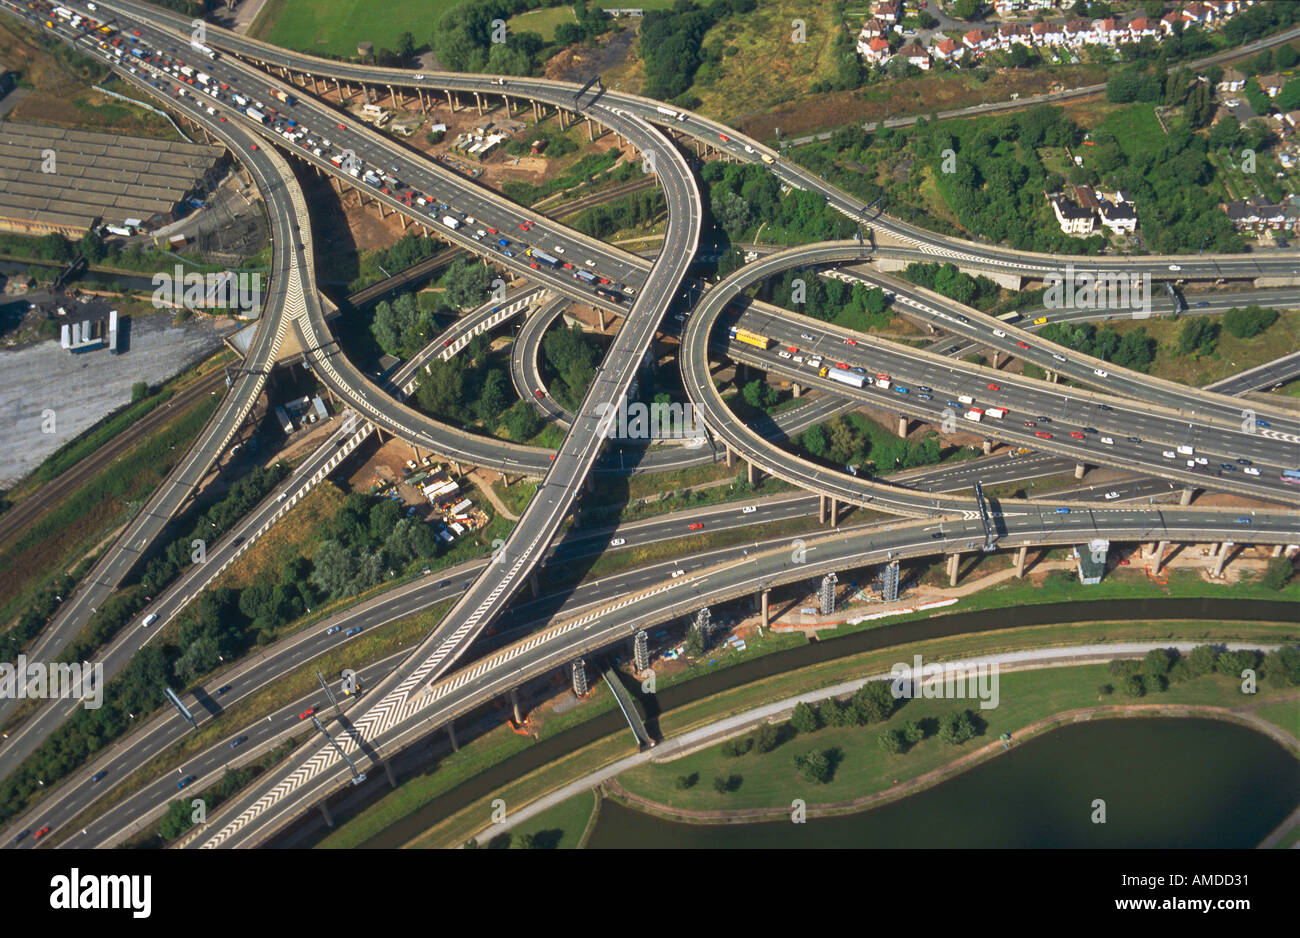 Spaghetti Junction motorway intersection from the air Stock Photo - Alamy